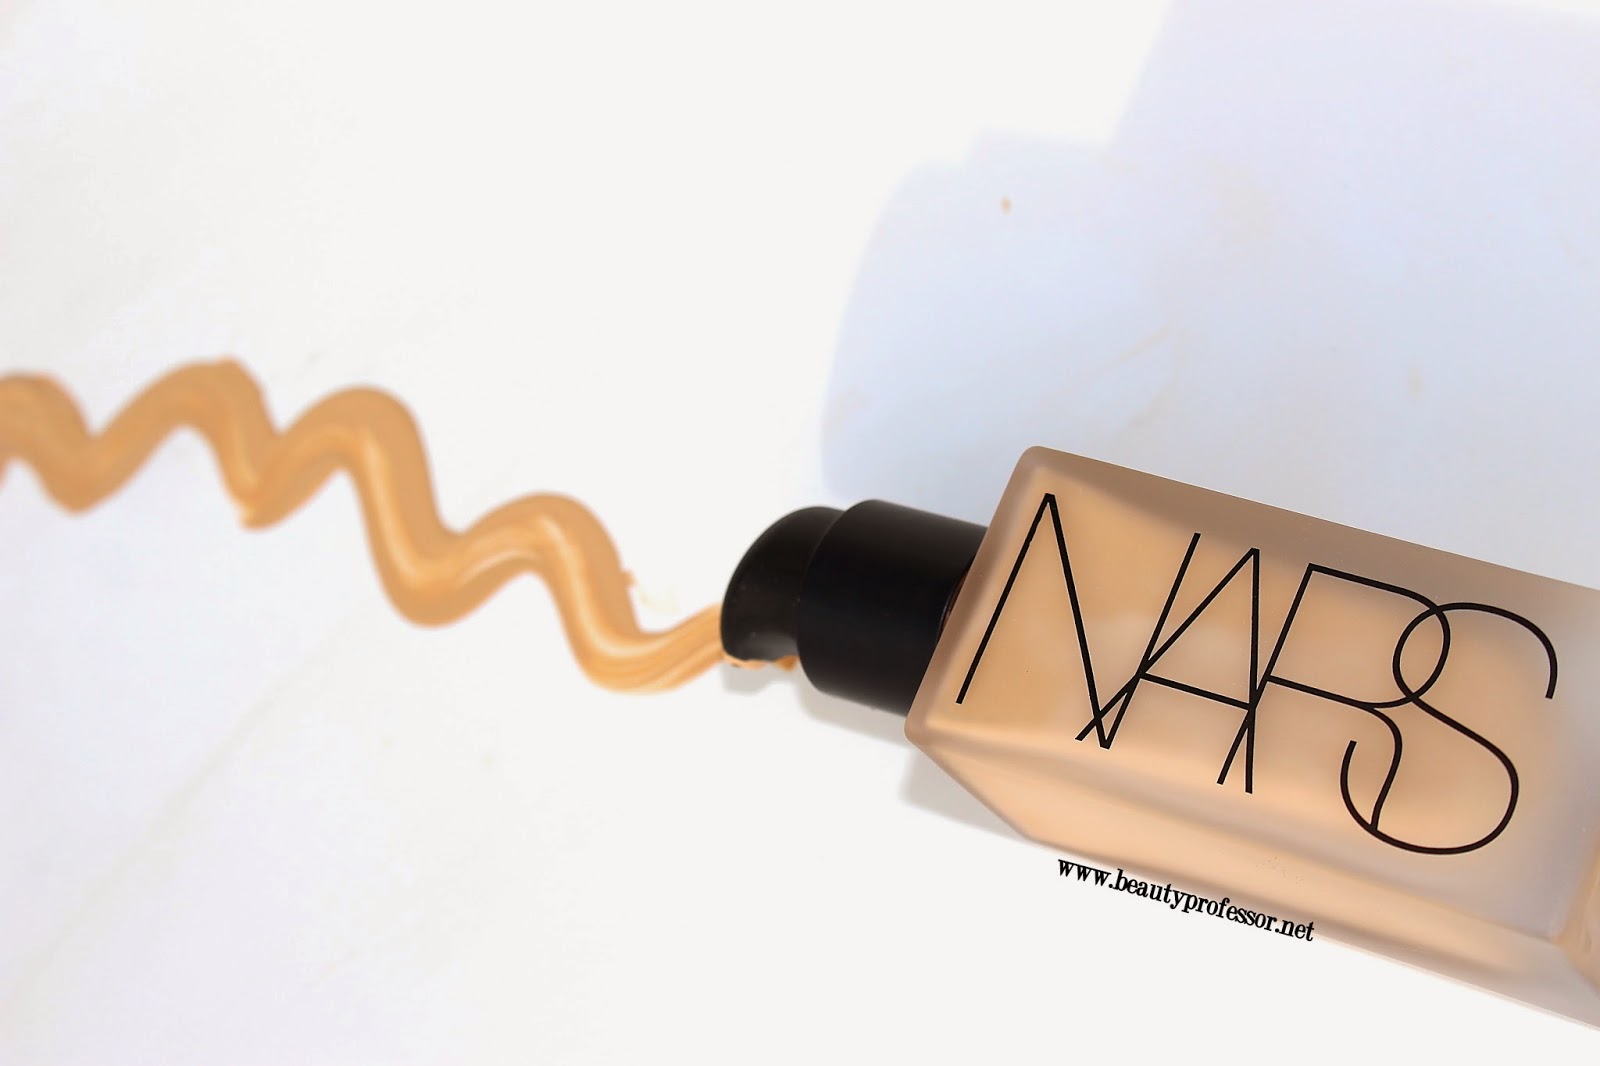 - Luminous Weightless of Professor EVERY + NARS Beauty Foundation...Intial Day All Impressions Shade! Swatches